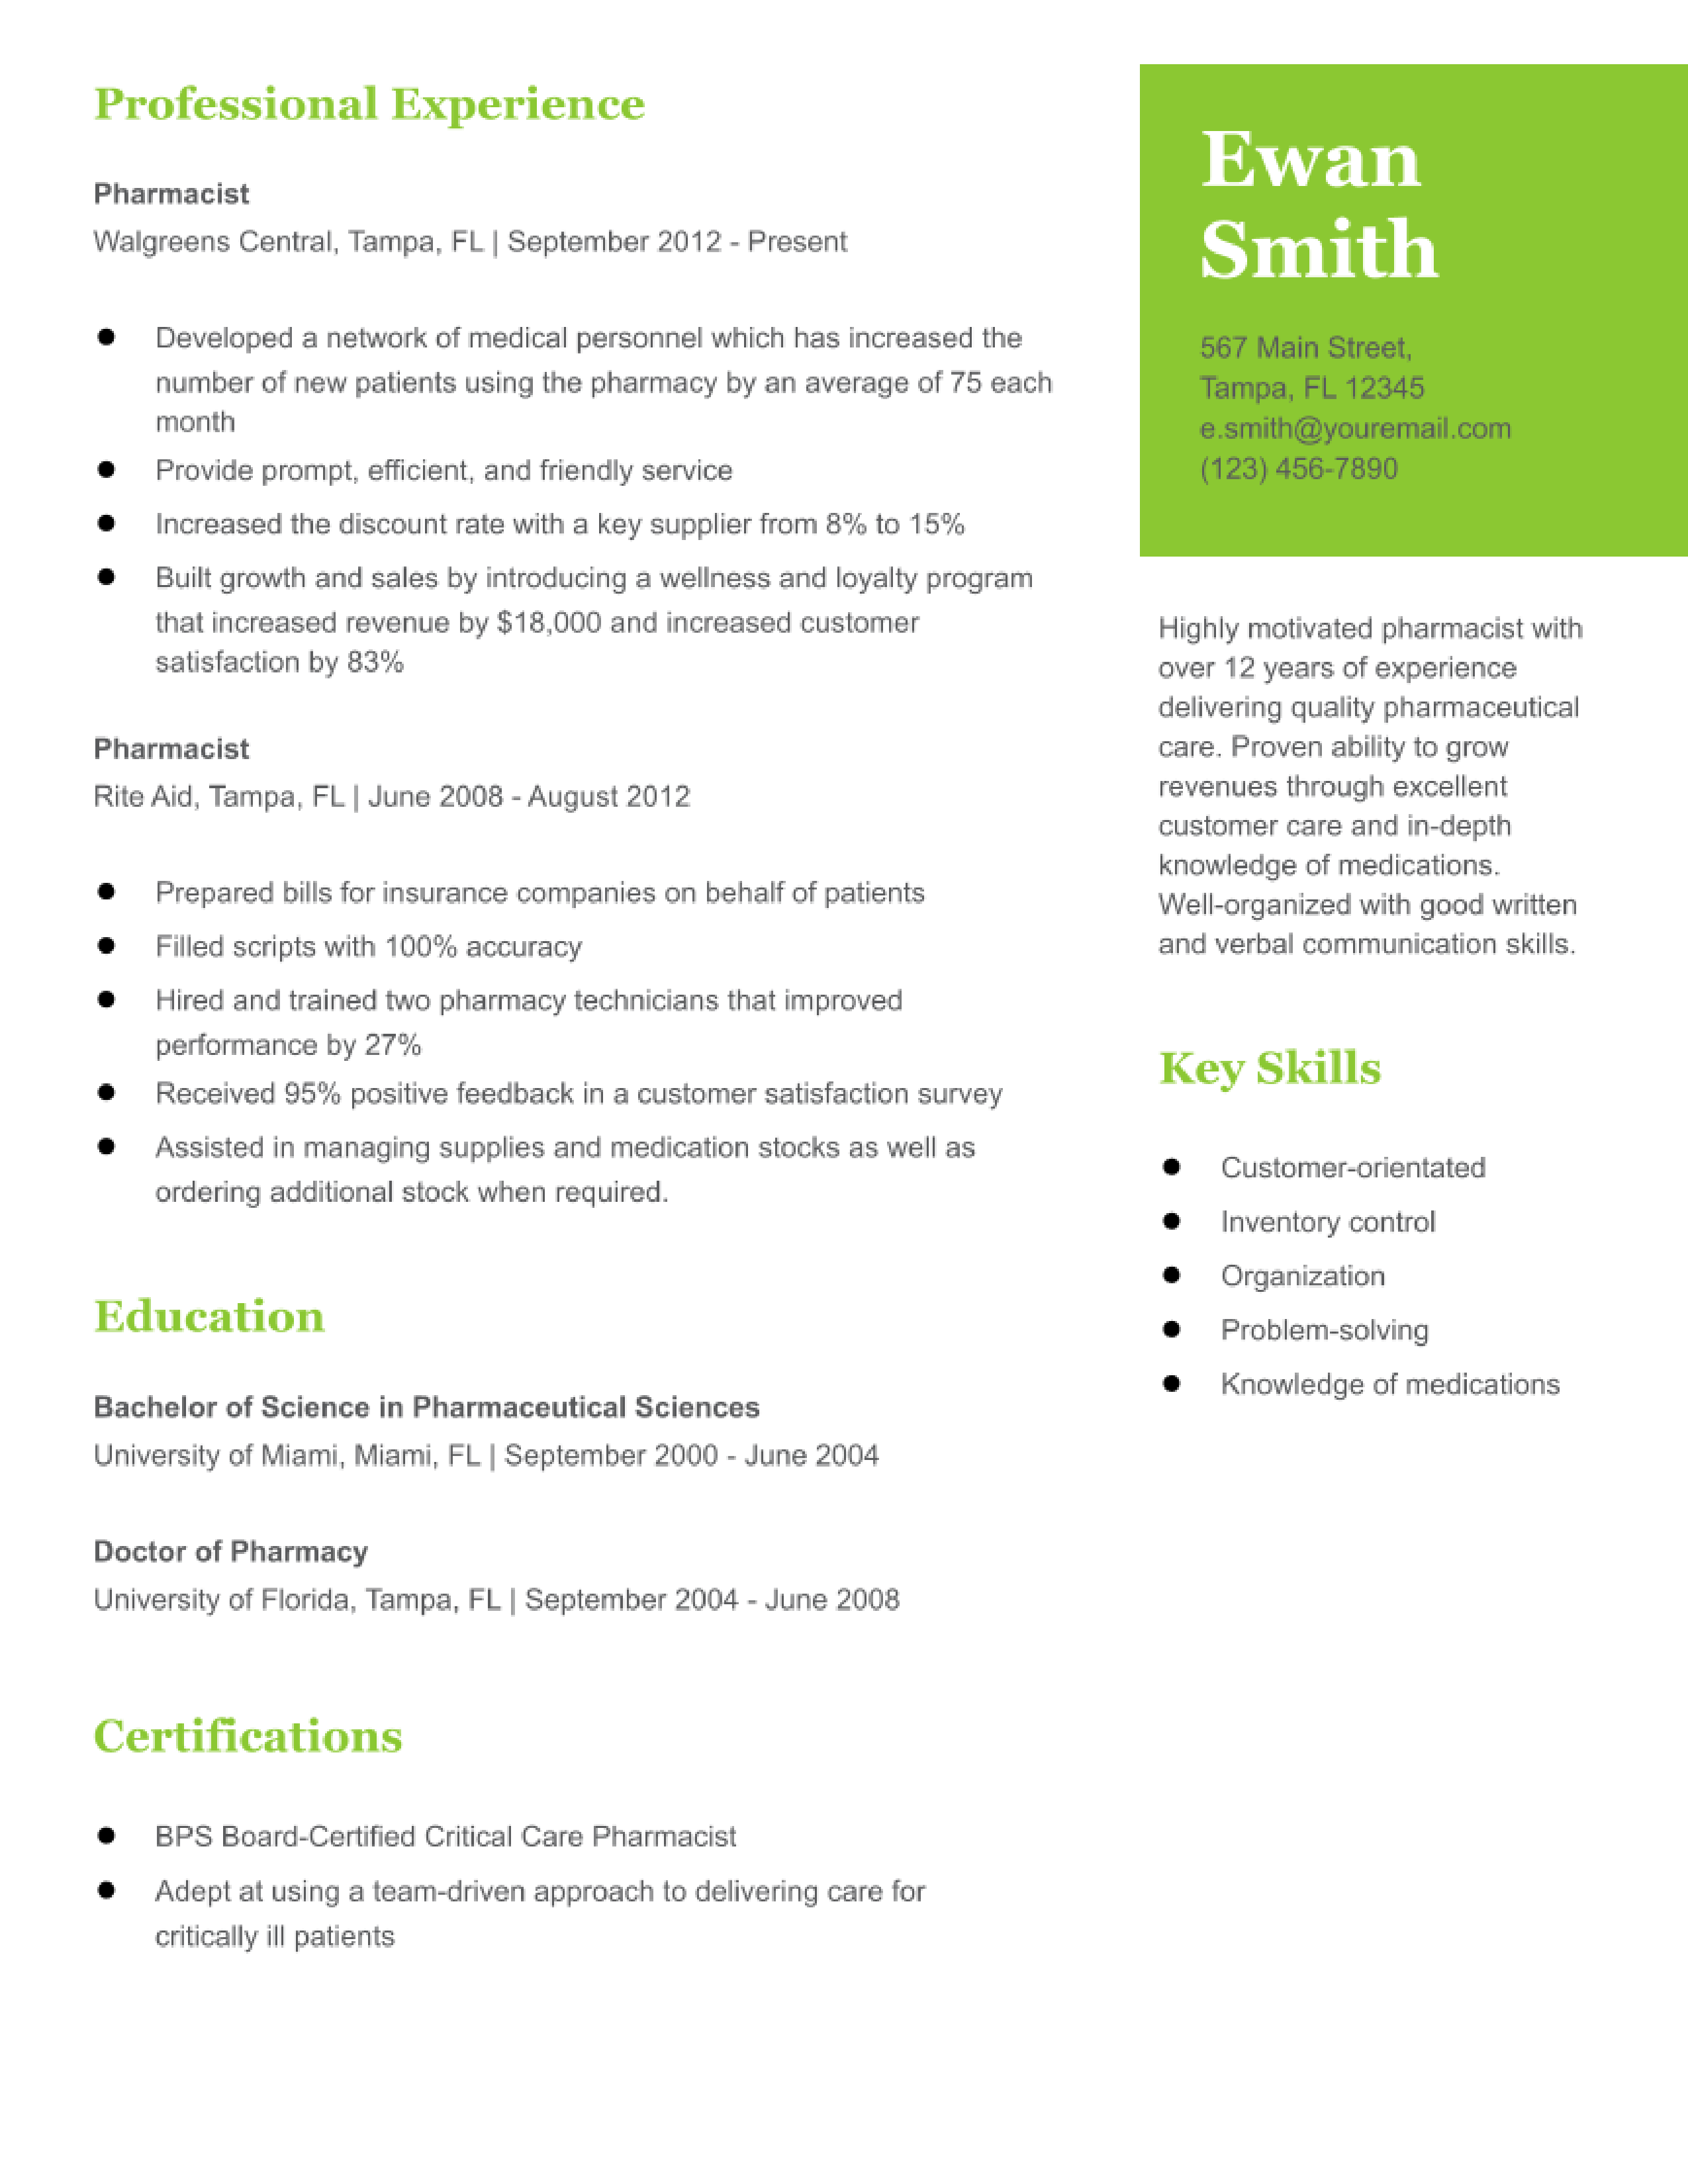 Pharmacist Resume Examples and Templates Banner Image